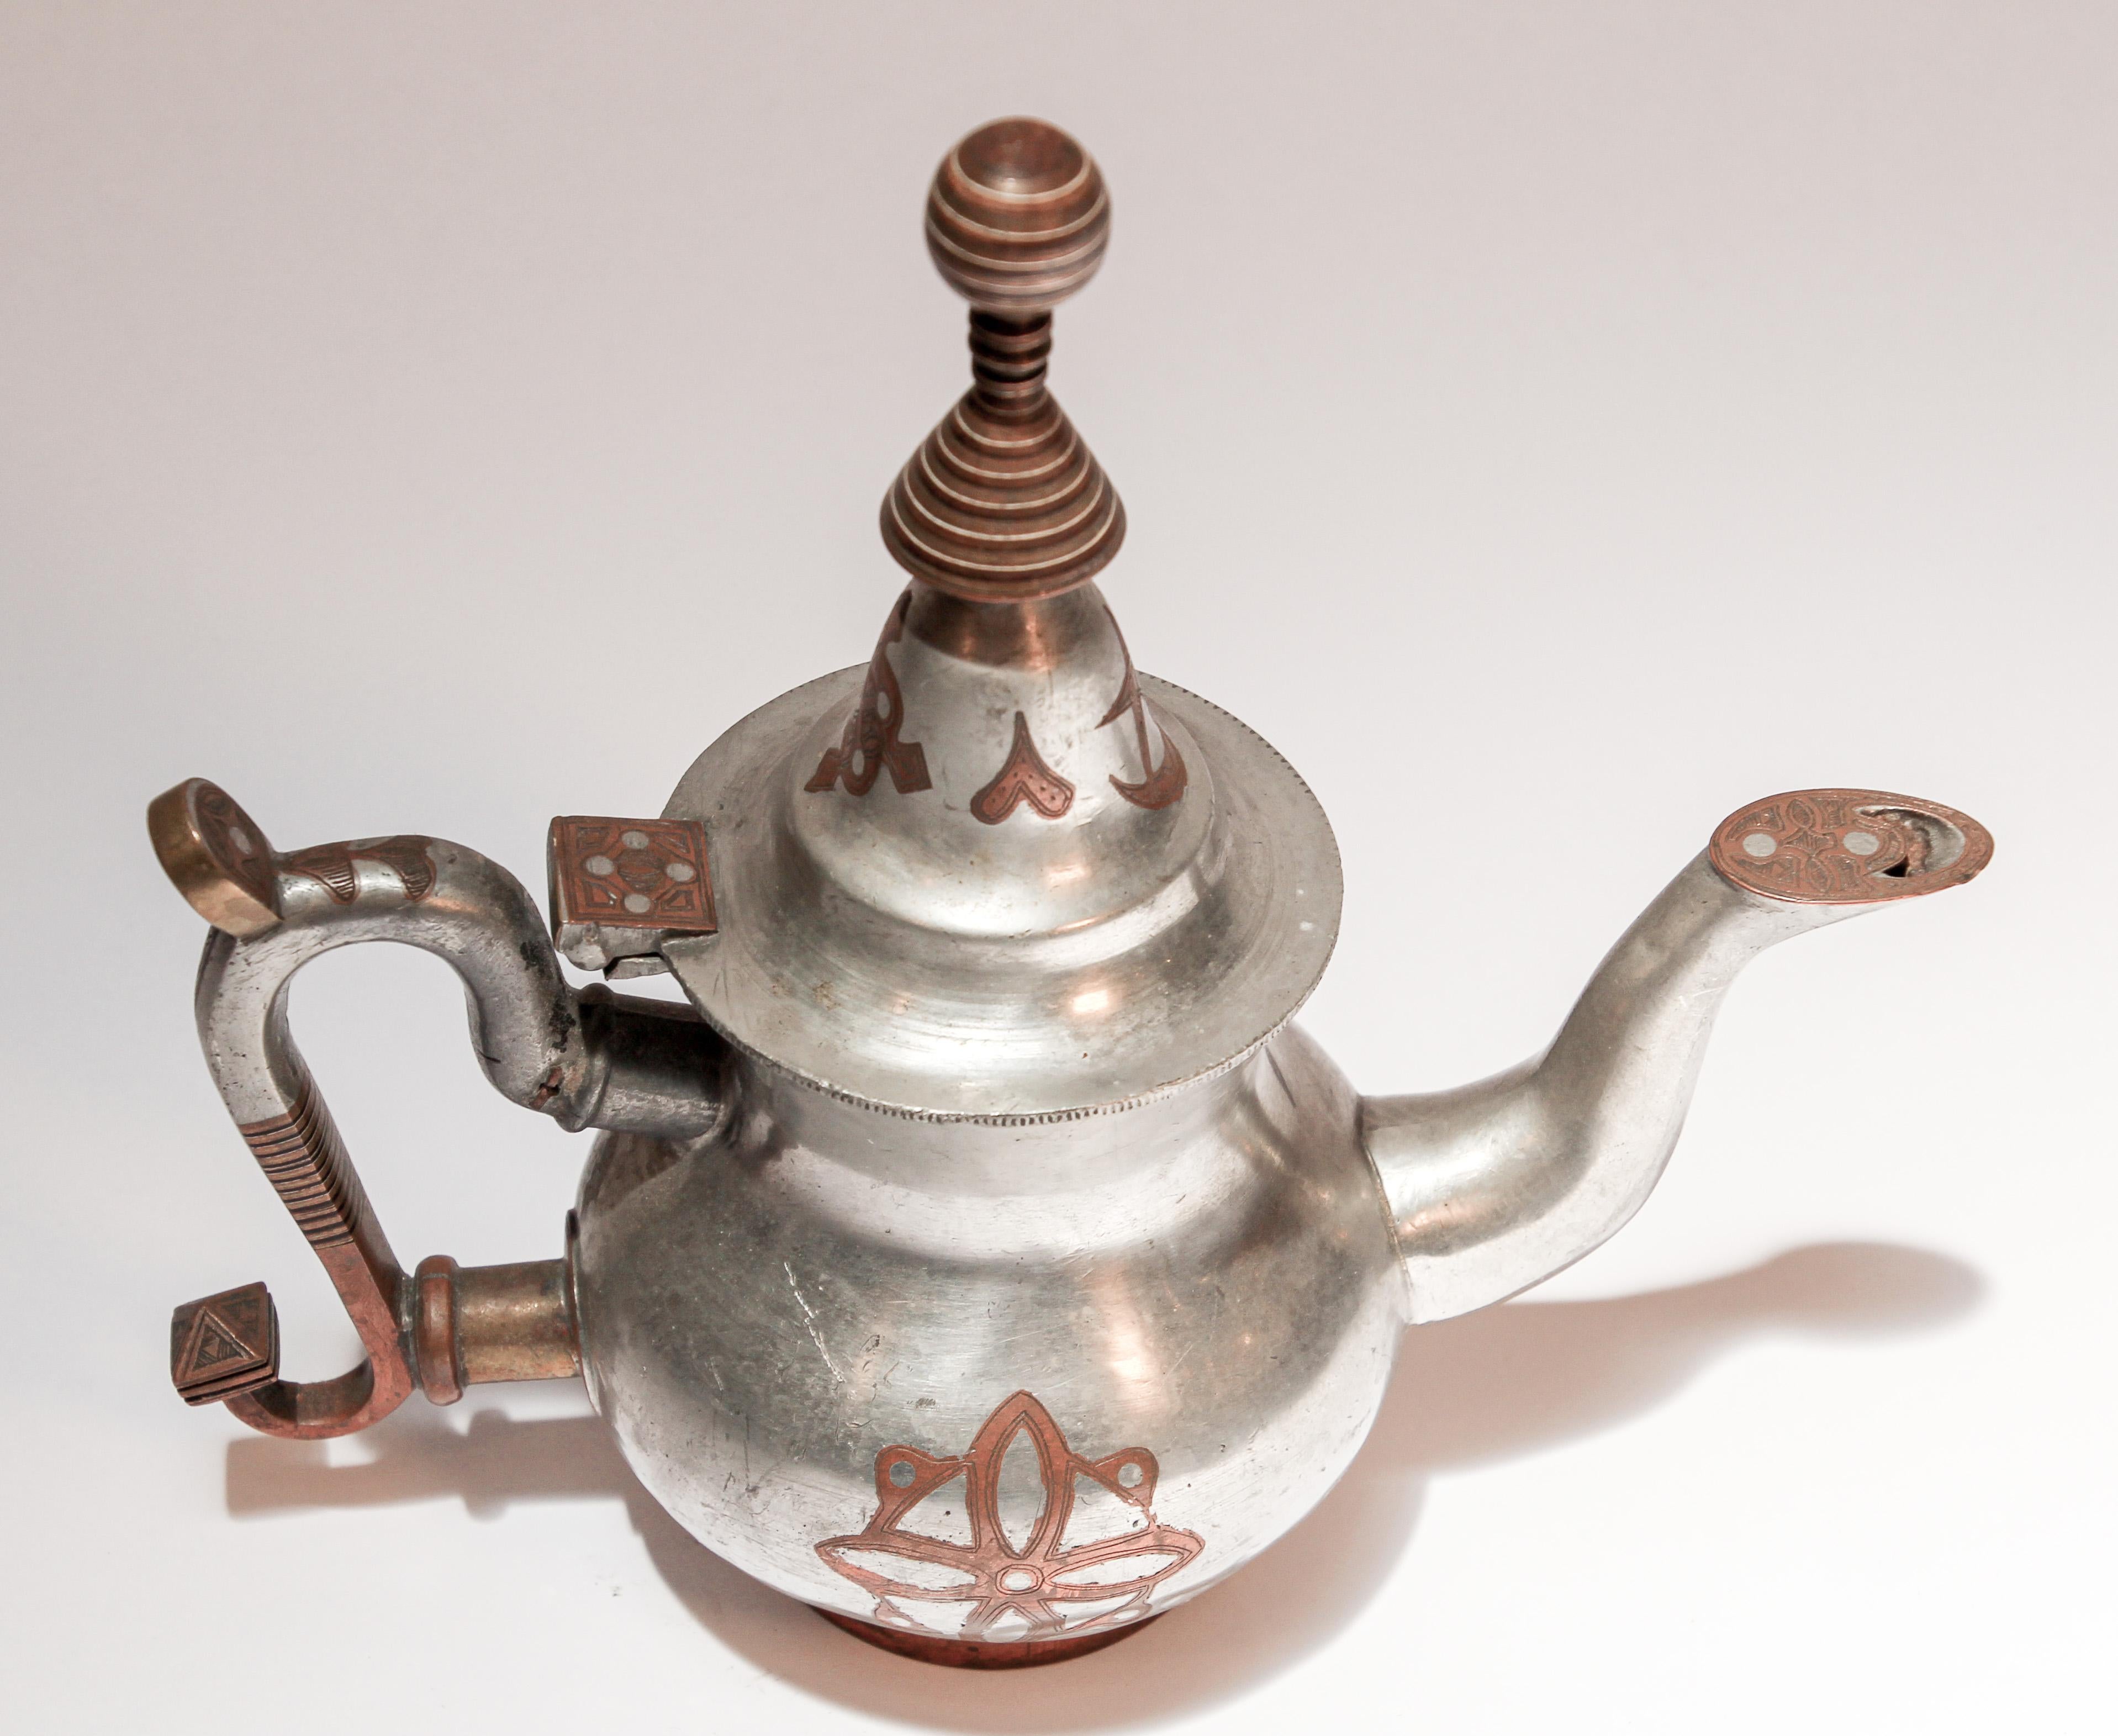 Mid-20th century Tuareg teapot from Mauritania, Africa, Western Sahara.
Handcrafted of pewter, copper and brass decorations.
The Tuareg people inhabit a large area, covering almost all the middle and western Sahara and the north-central